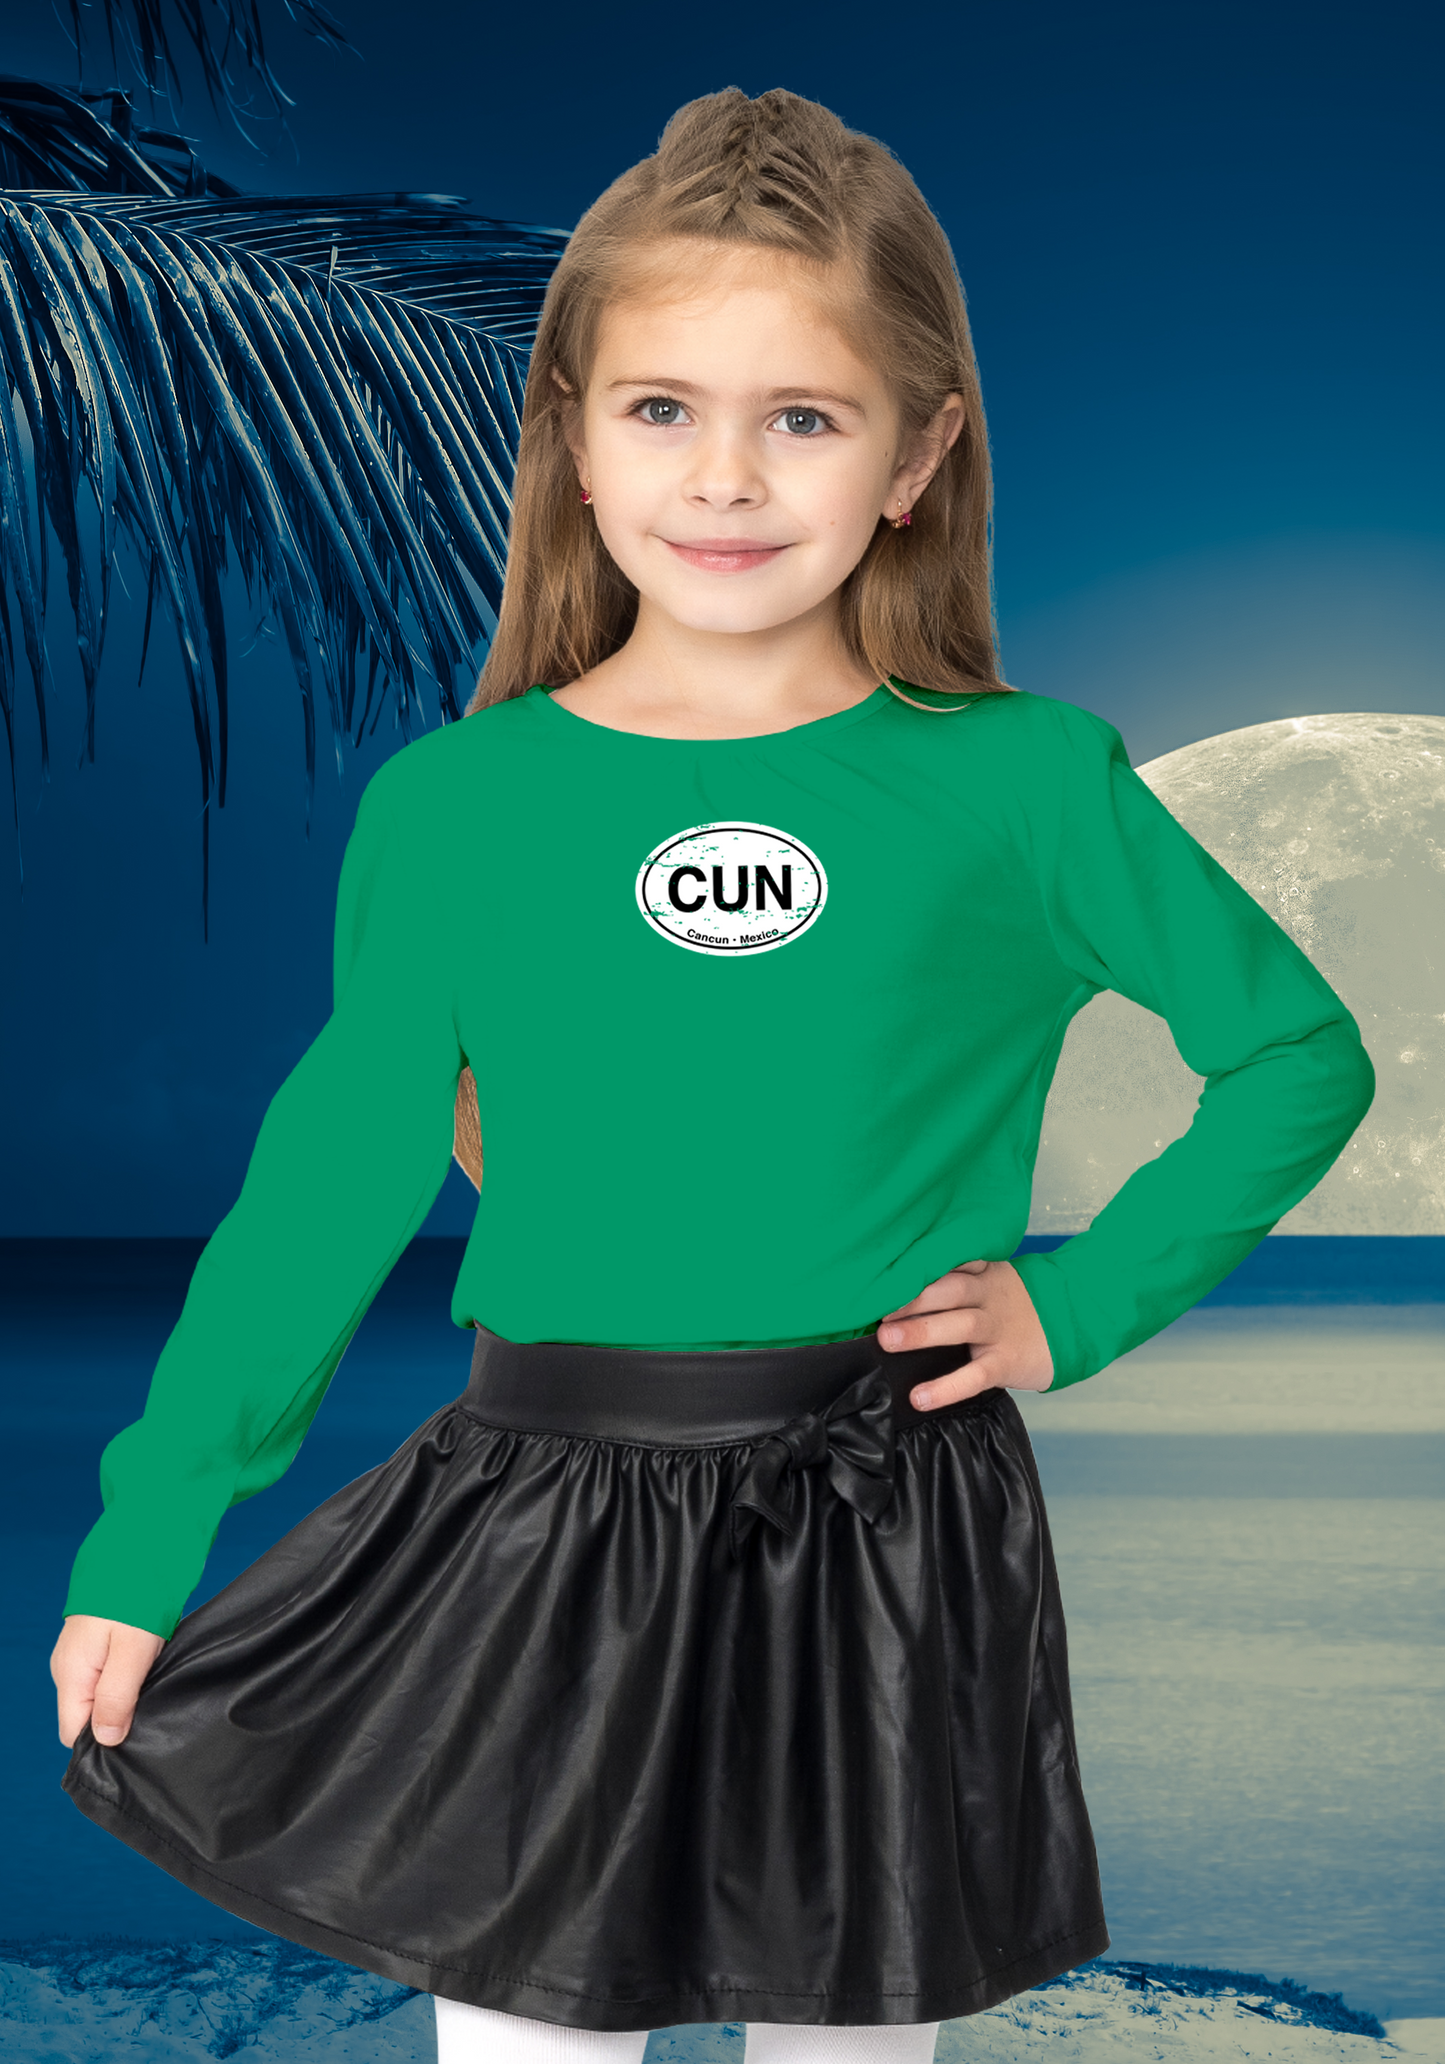 Cancun Youth Classic Long Sleeve T-Shirts - My Destination Location